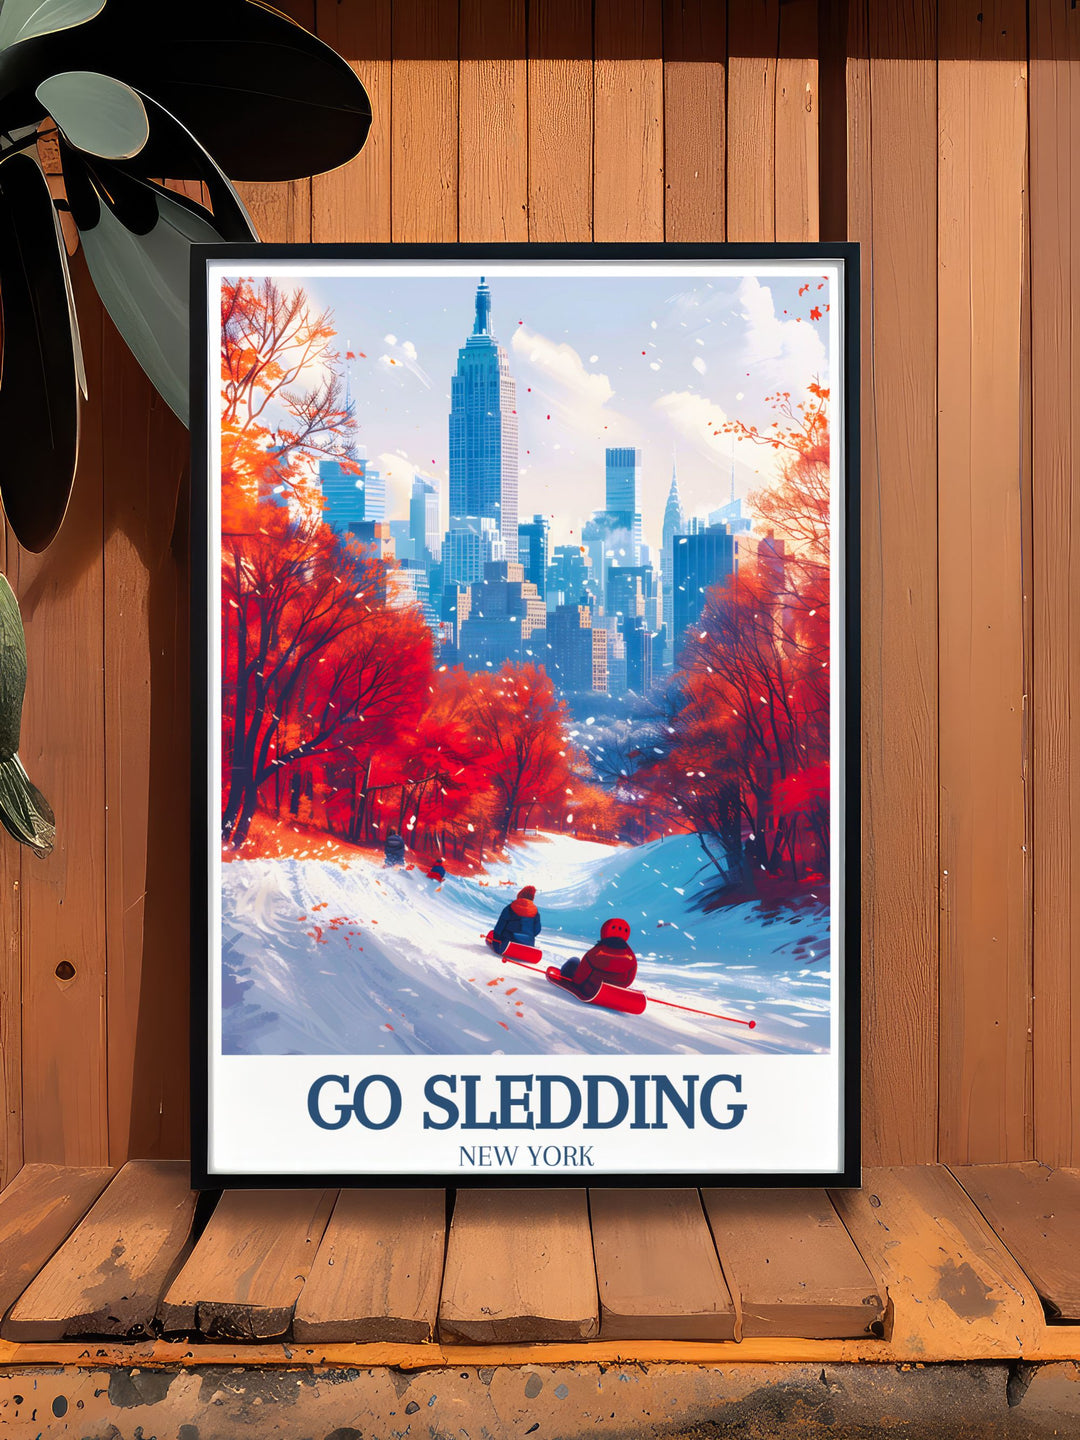 Canvas art depicting the thrill of sledding in Central Park, highlighting the dynamic landscape and festive winter atmosphere in New York City.